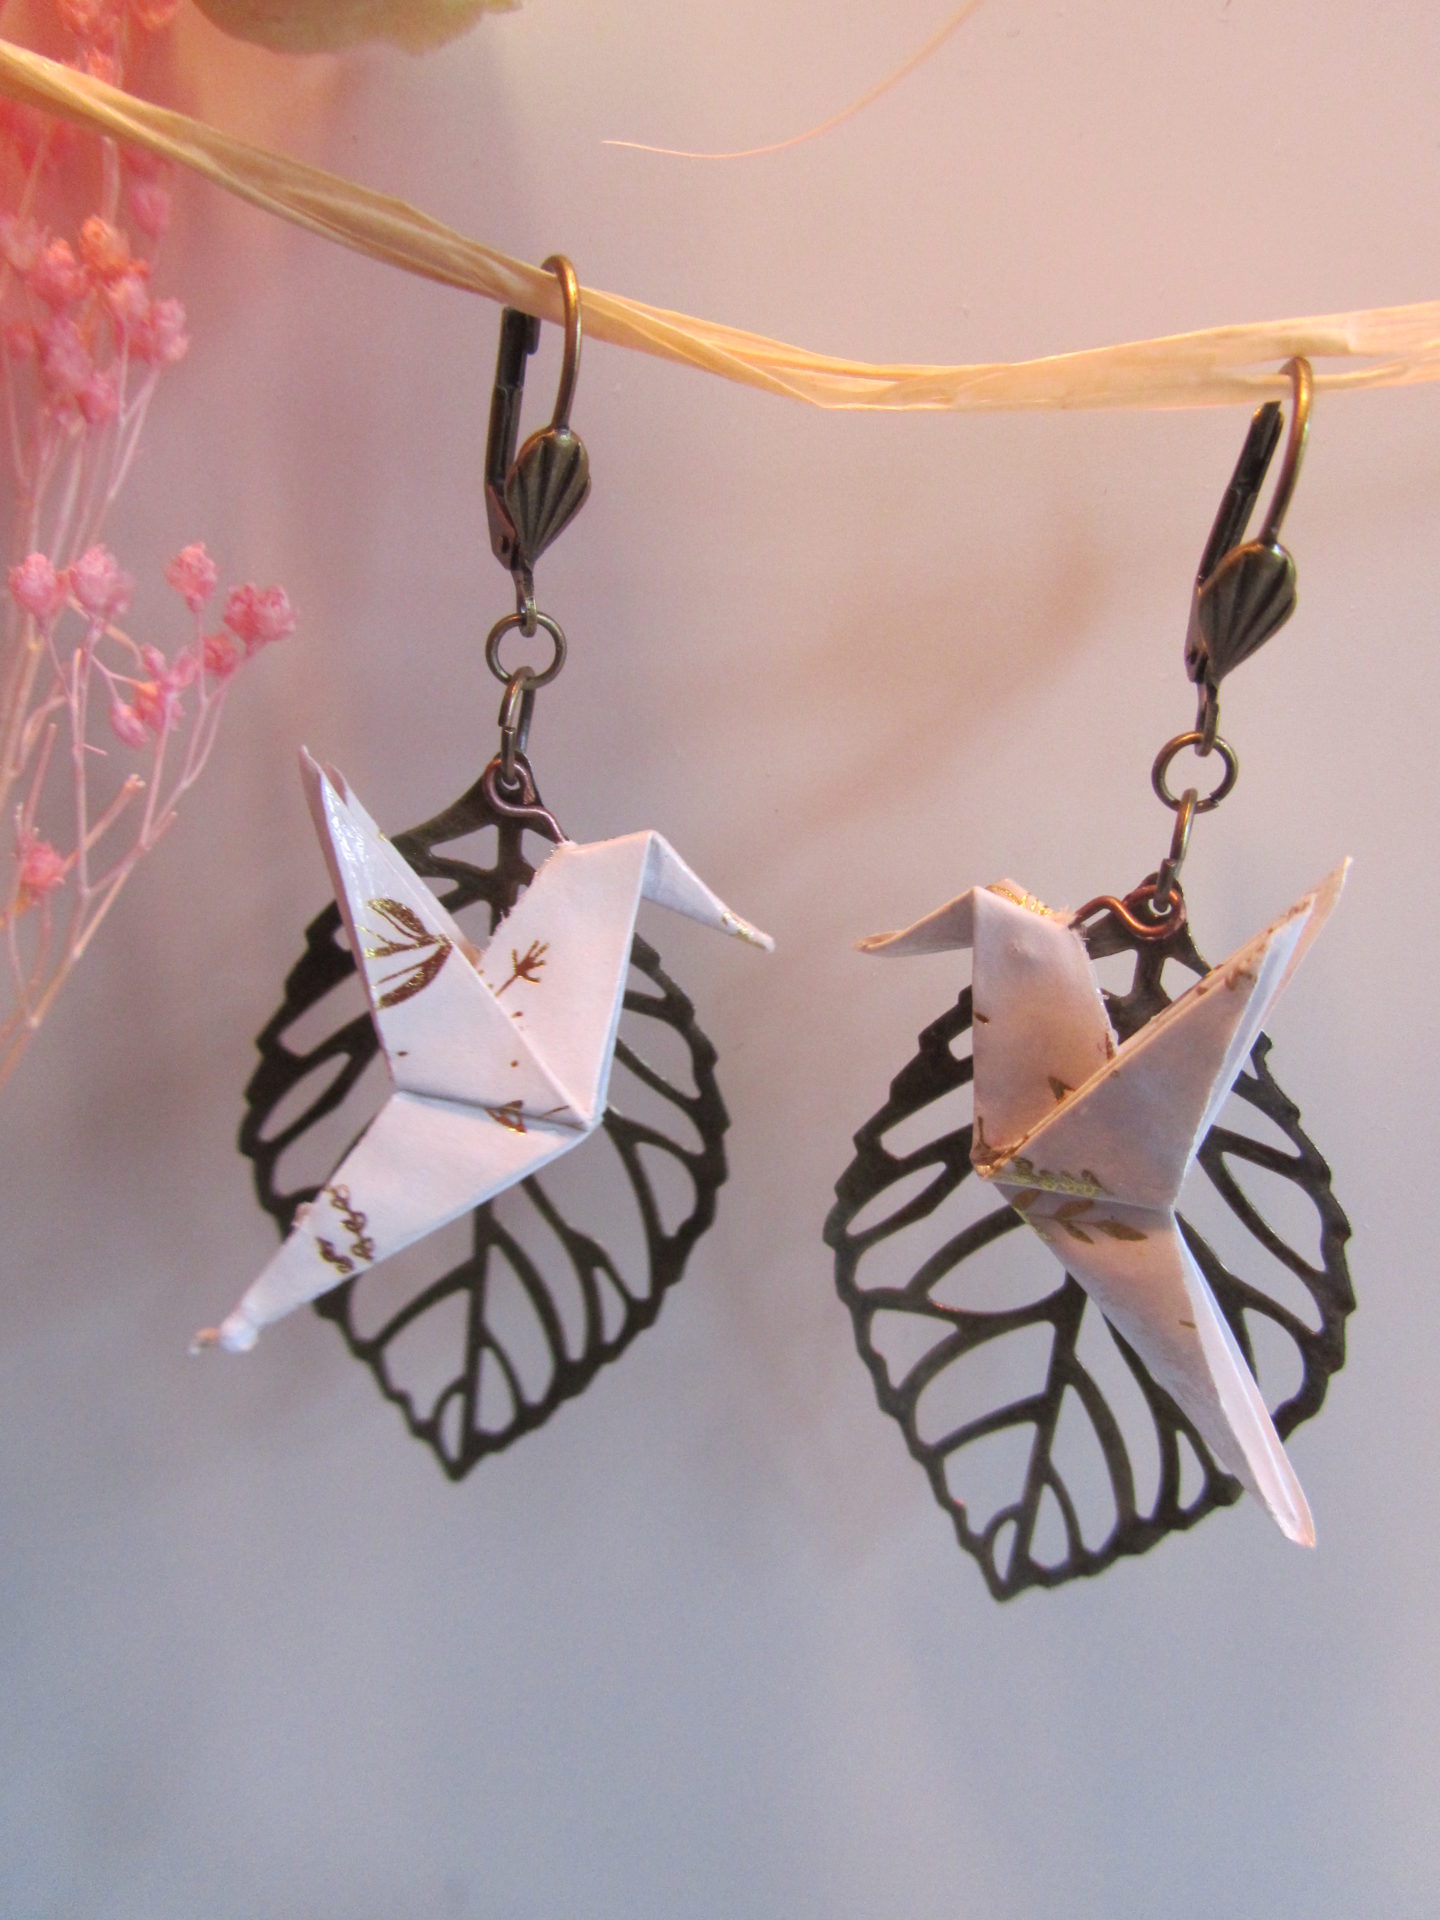 Boucles d'oreilles origami - Colombes Hermine